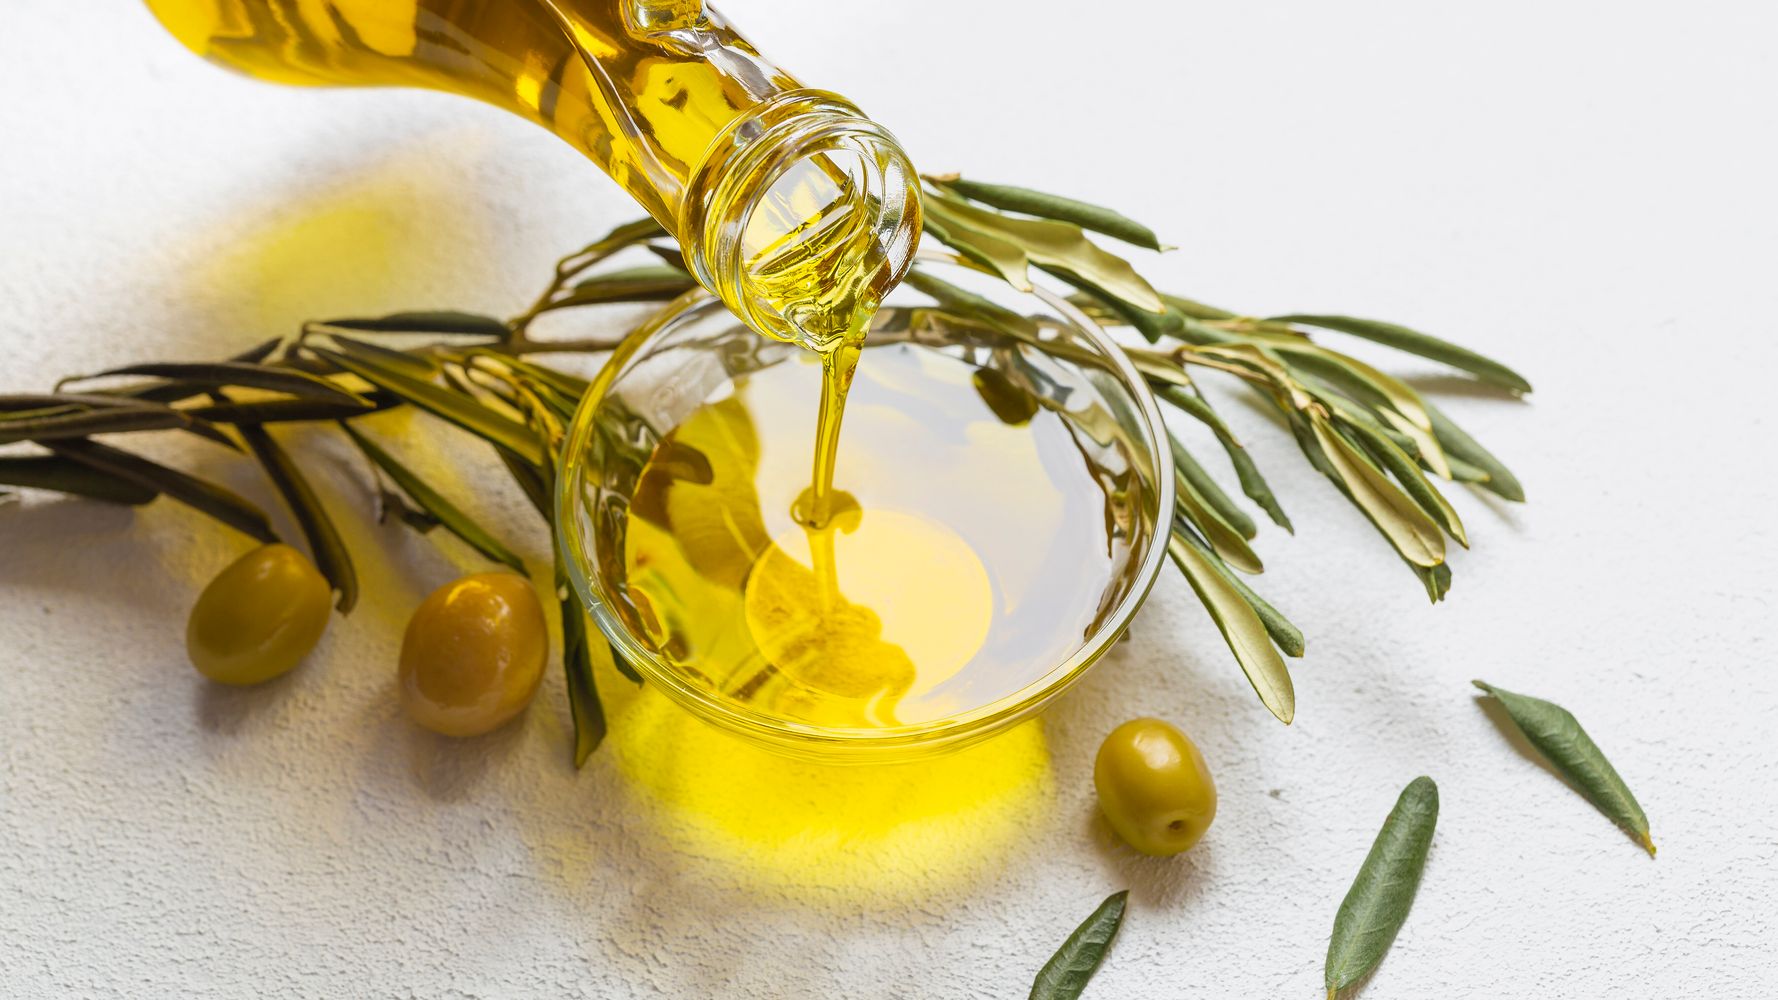 Is Olive Oil Good For Us Or Not? Here's What Experts Argue About